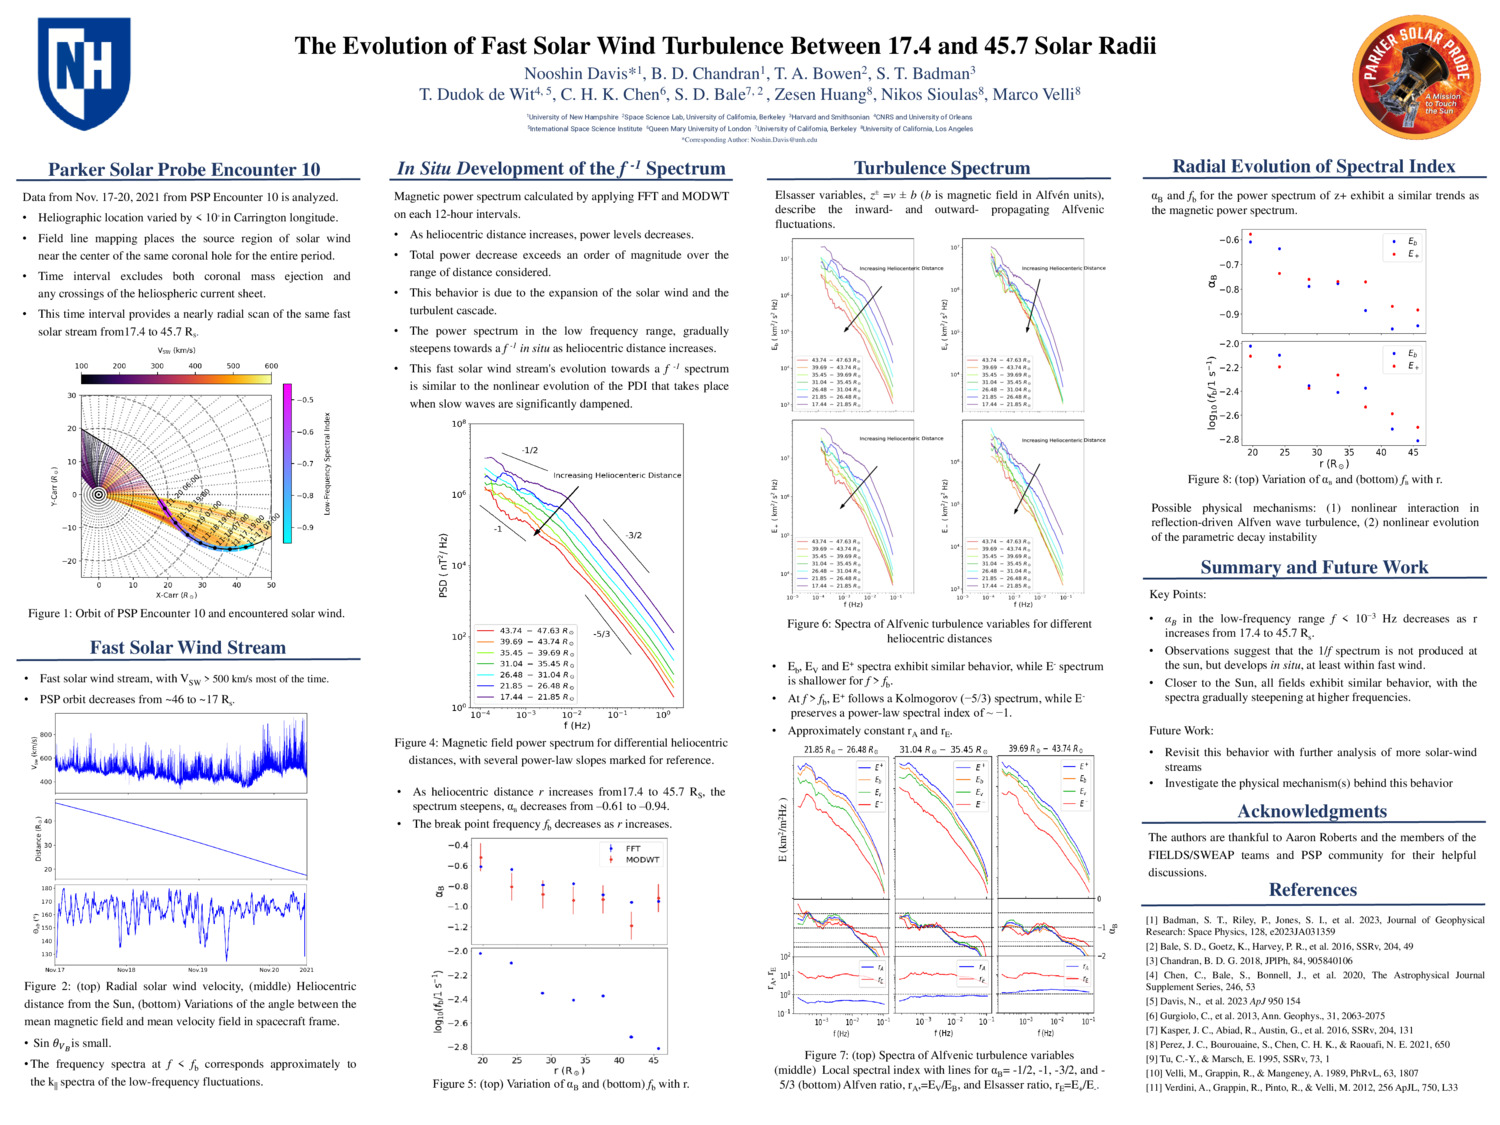 The Evolution Of Fast Solar Wind Turbulence Between 17.4 And 45.7 Solar Radii by Nooshin